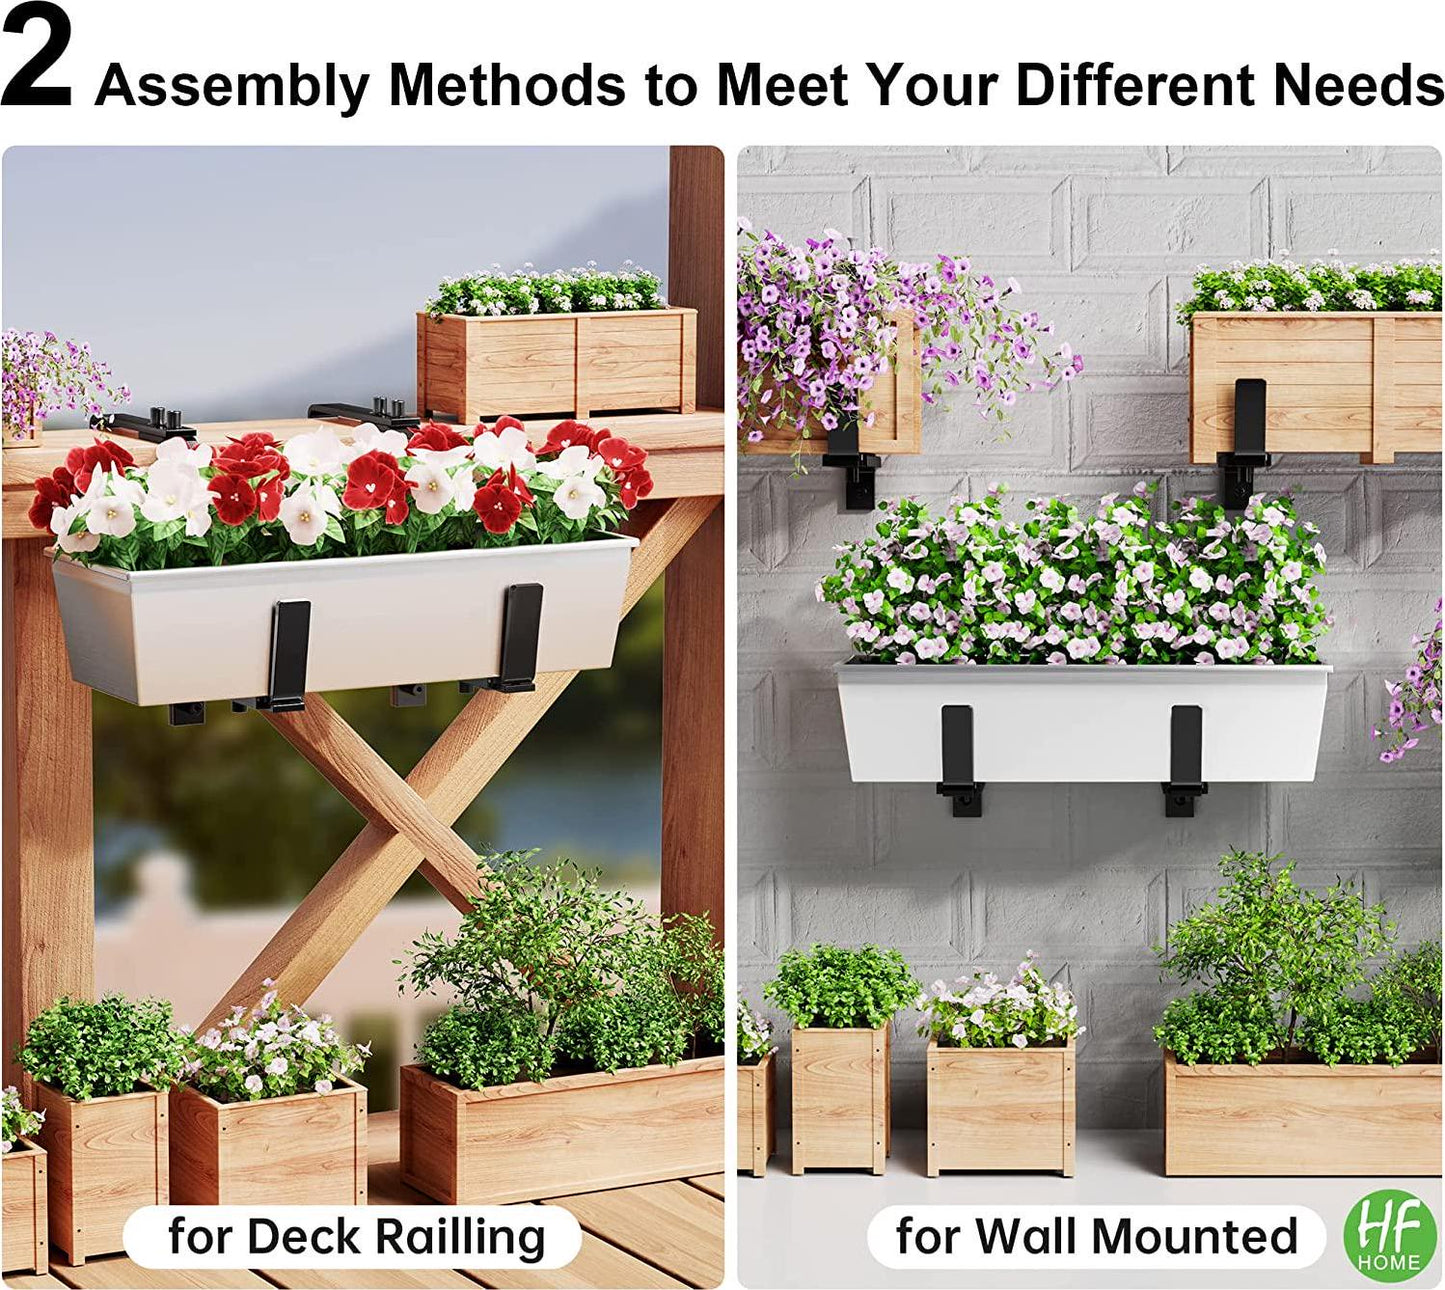 HFHOME 4 PCS Adjustable Planter Box Bracket (6 to 12.5 Inches) for Flower Box Holders, Window Boxes Planters Hooks, Heavy Duty Wall Mount Holder - Black